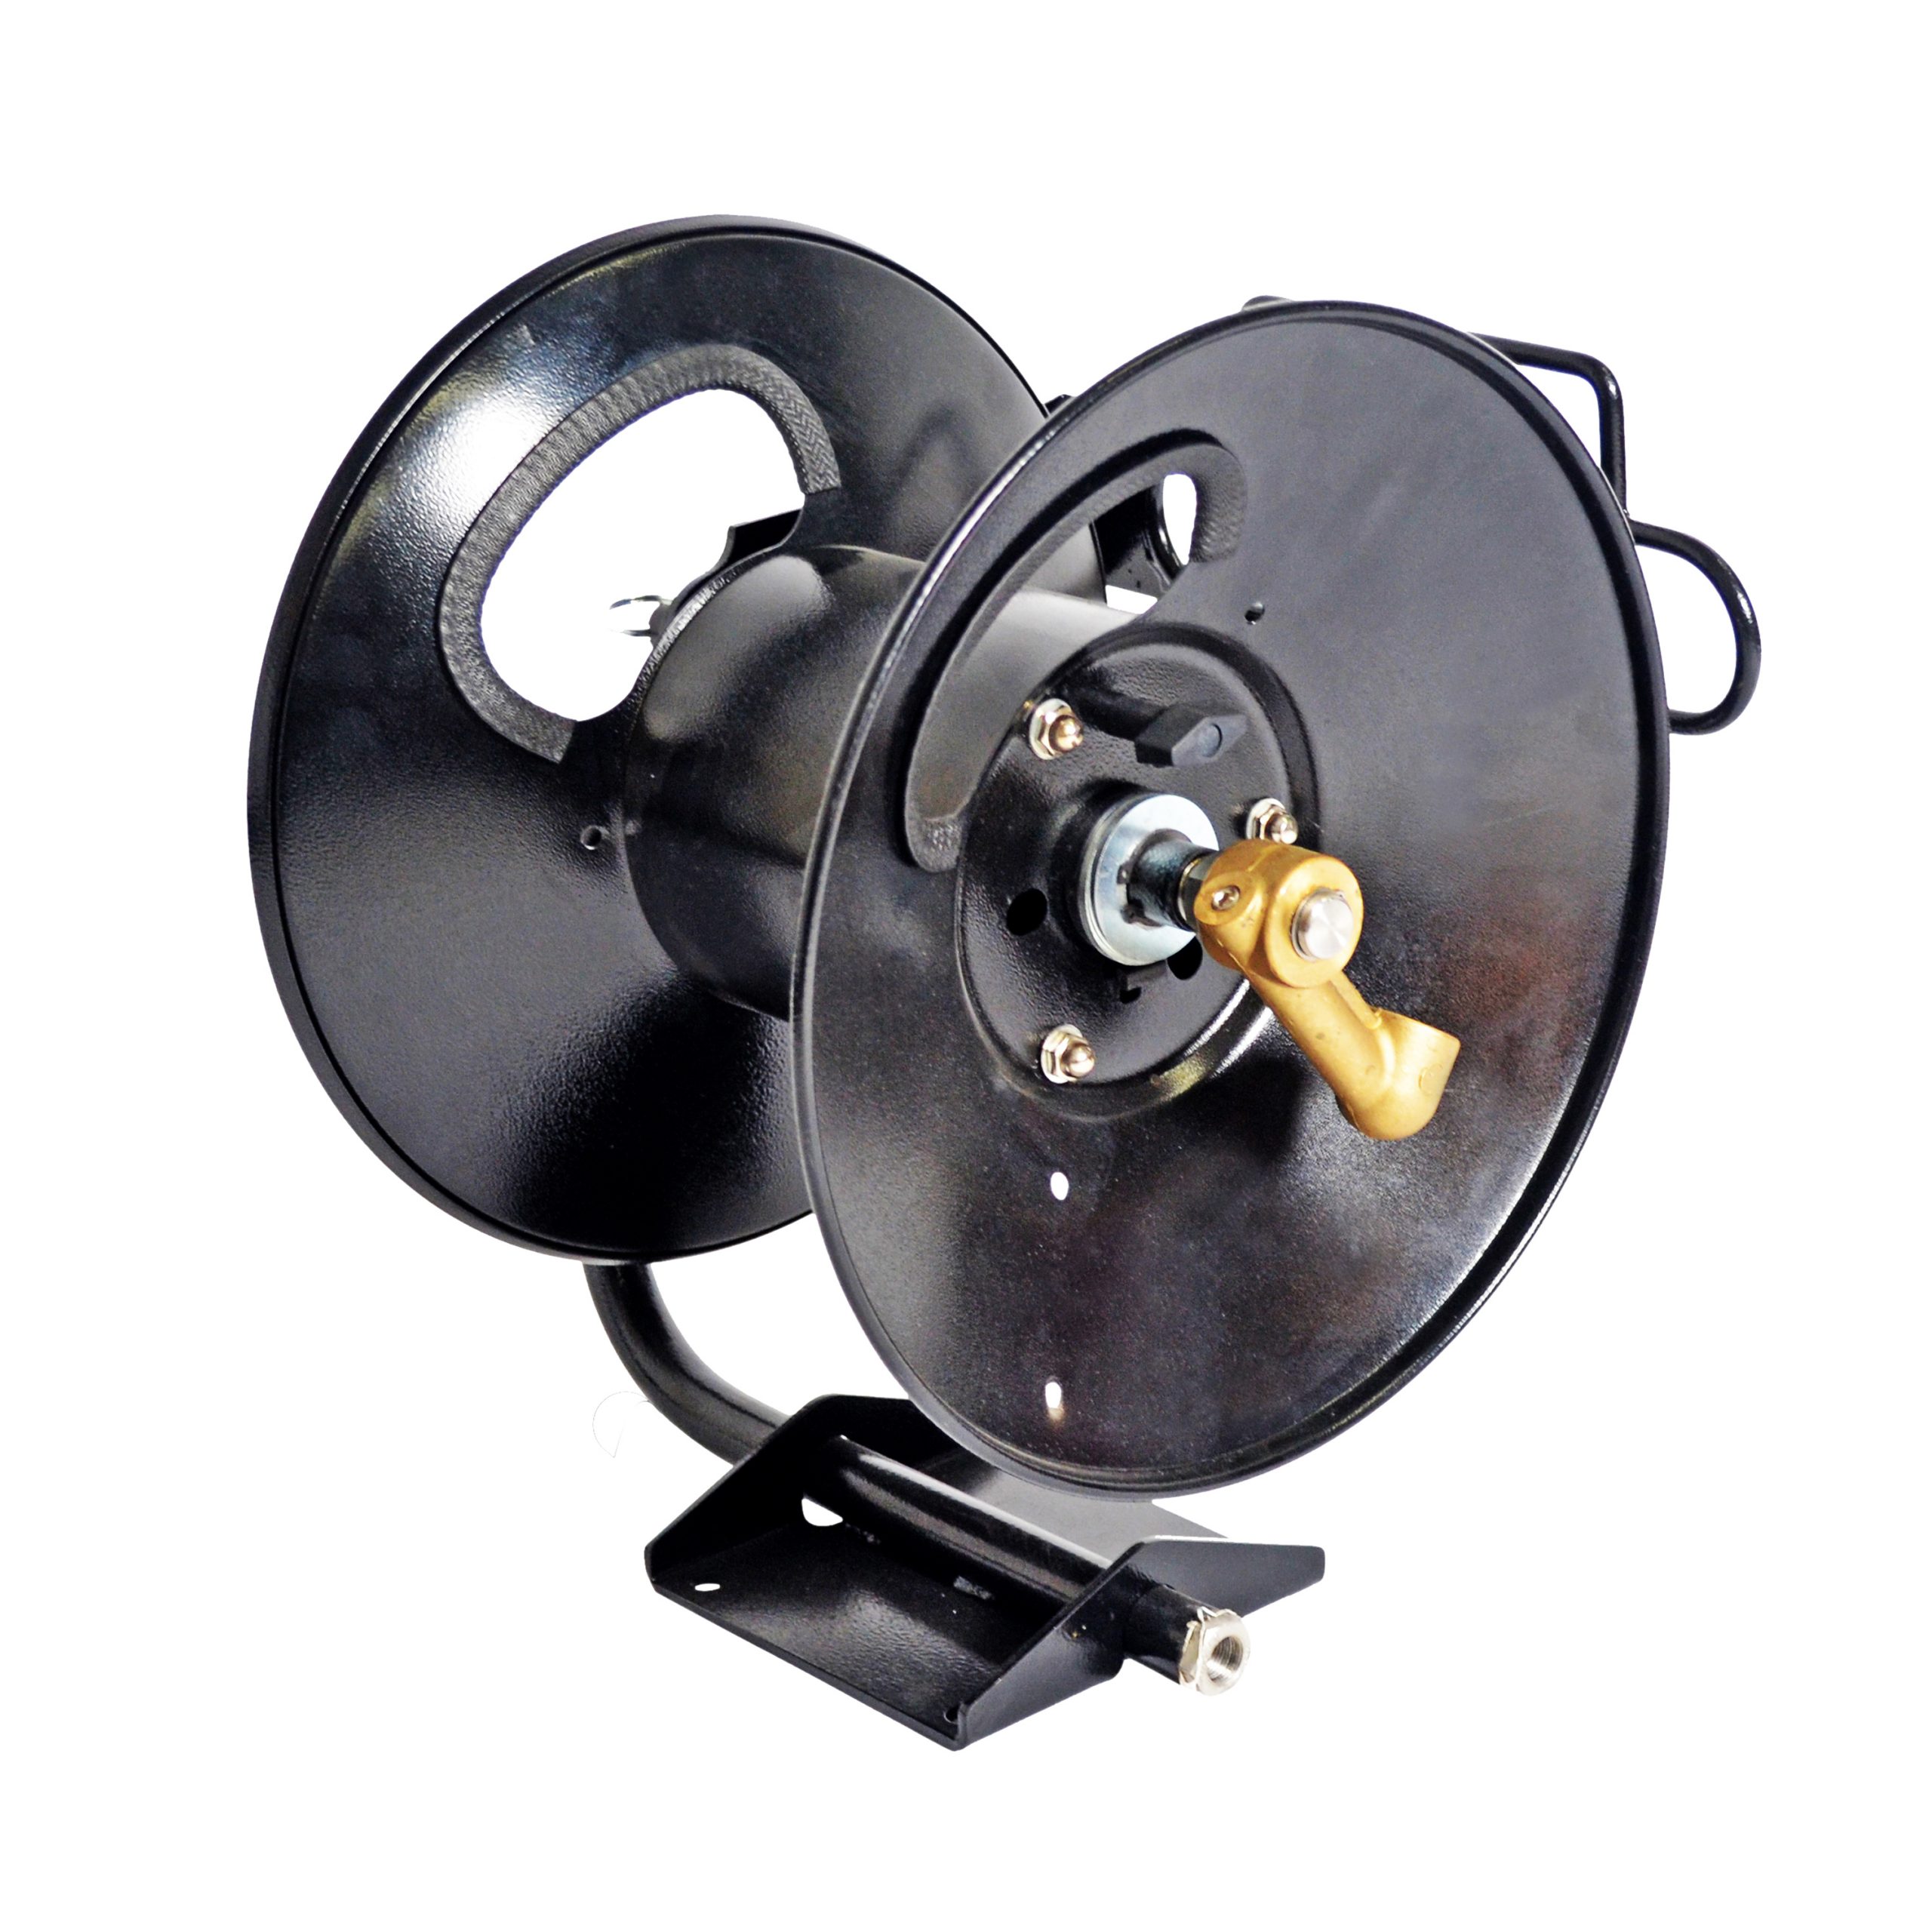 Are Hose Reels Overrated? Do You Actually Need a Hose Reel for Commercial Pressure  Washing?